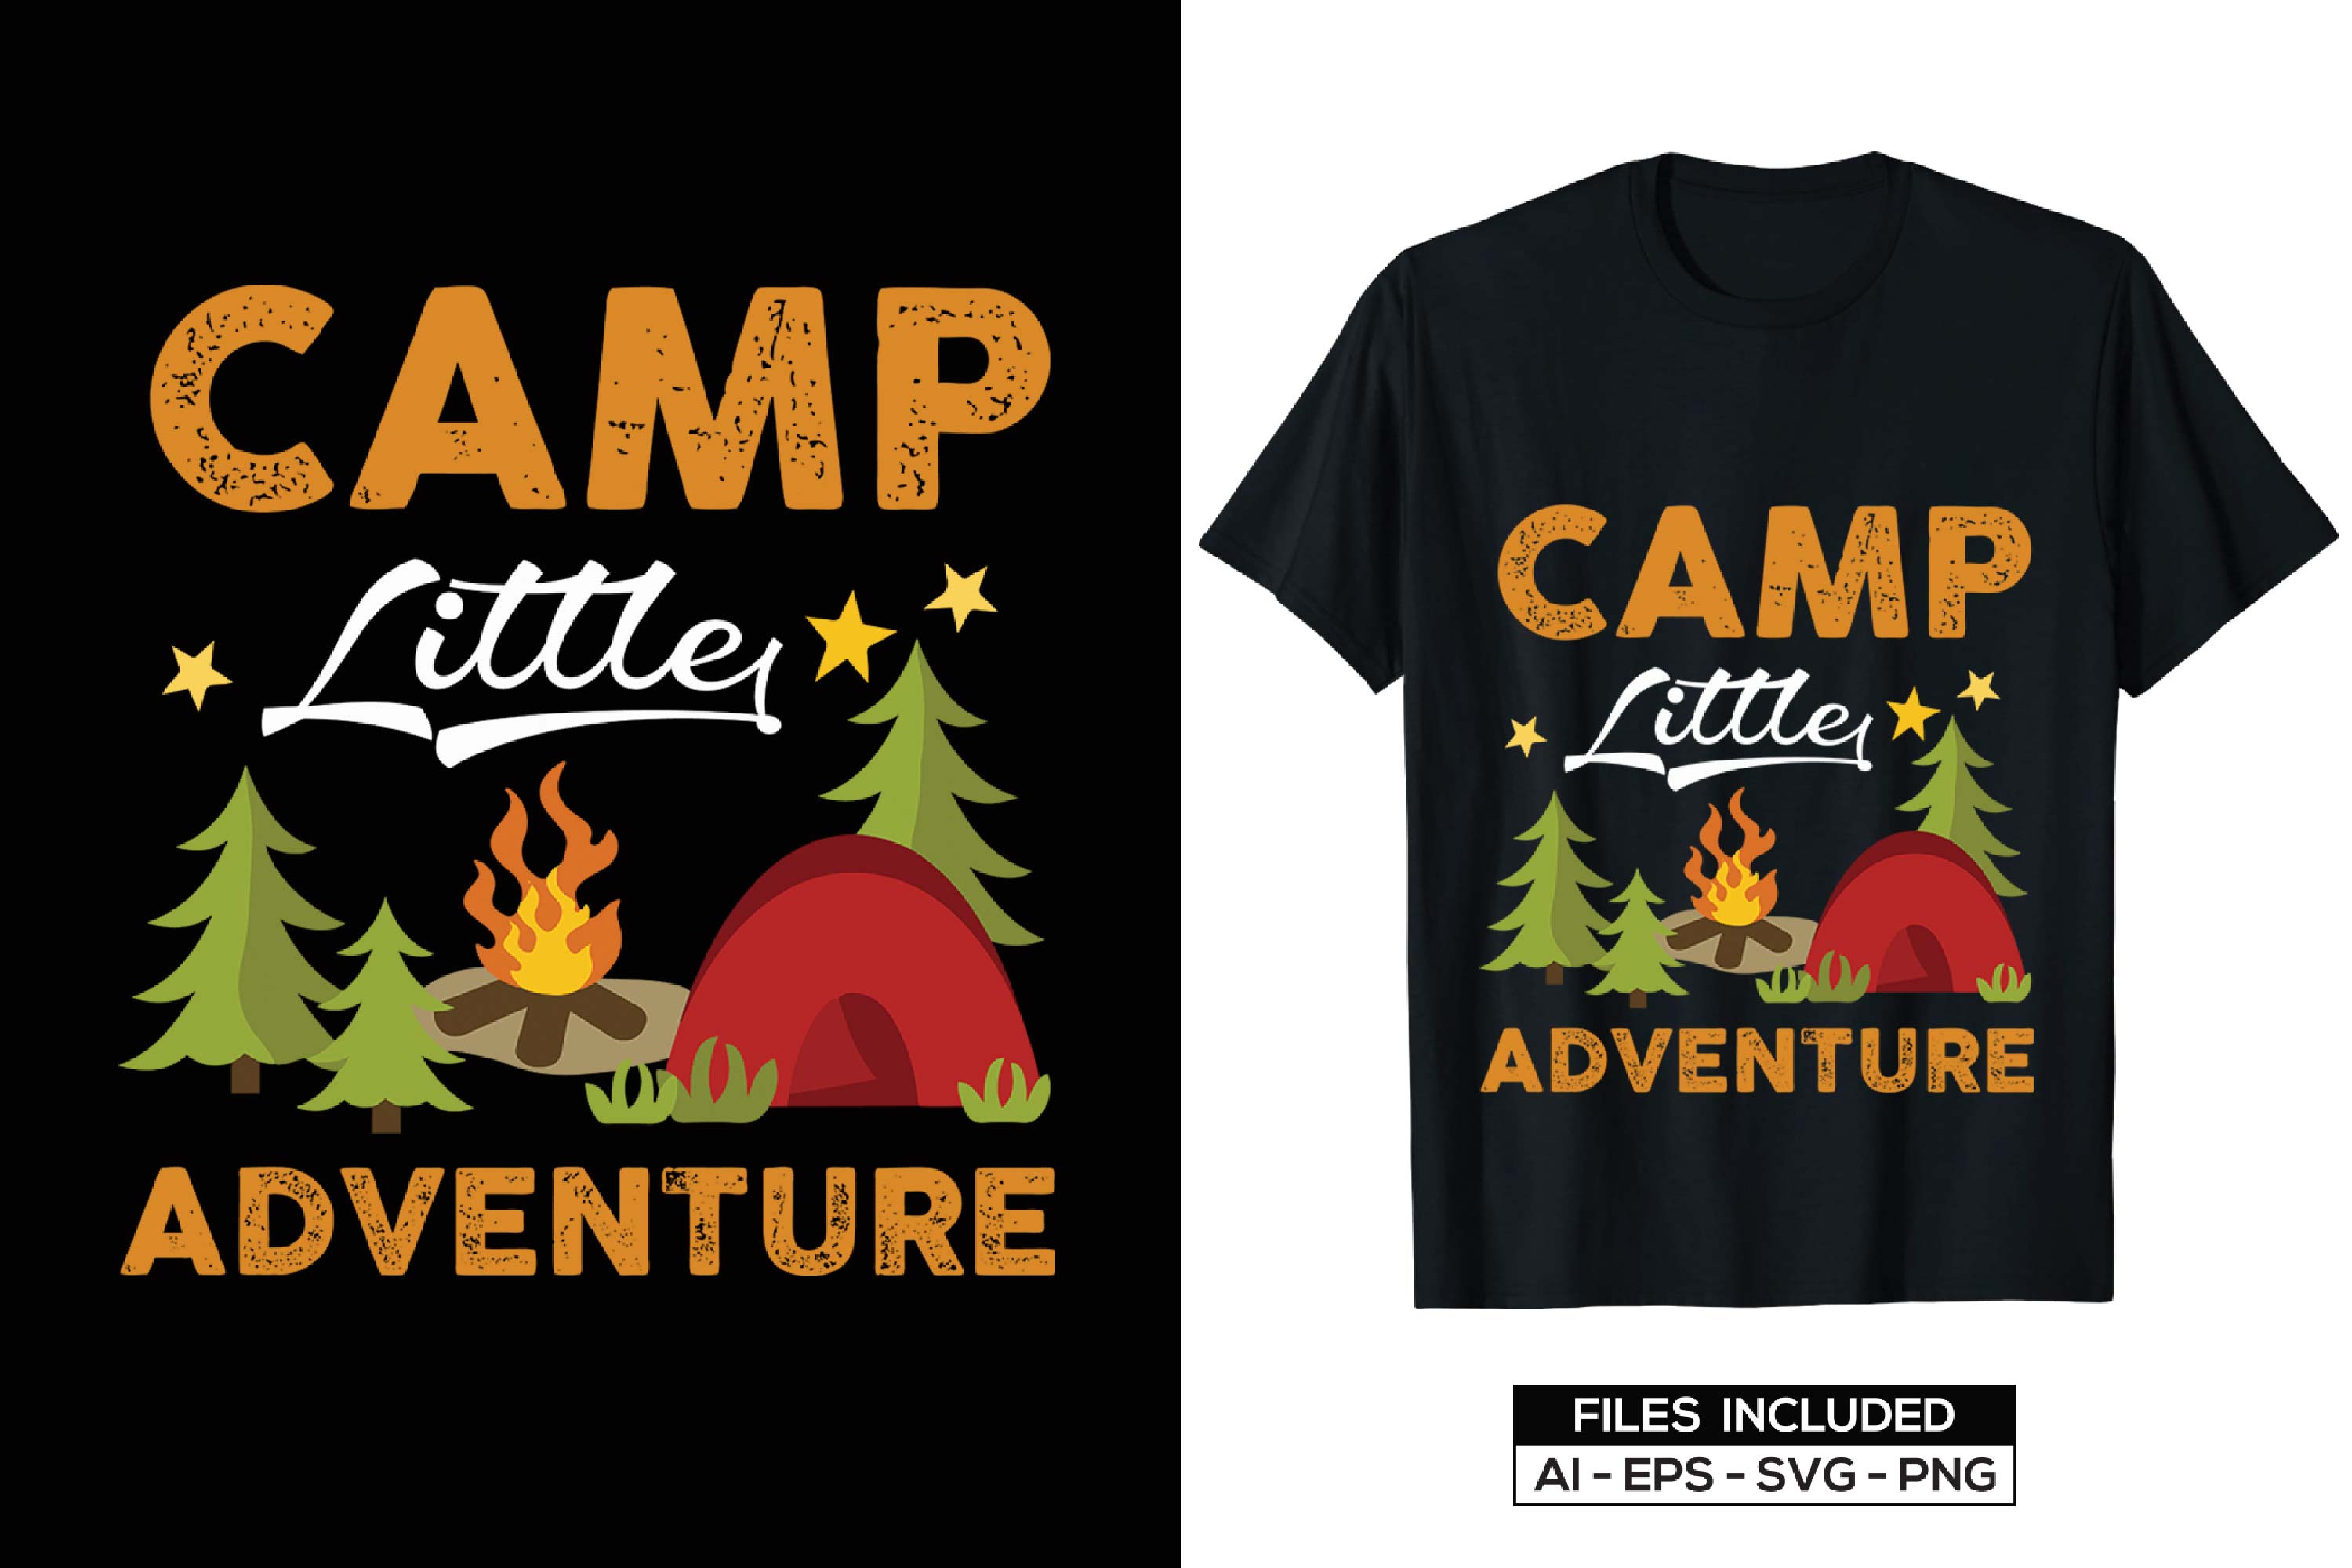 Image of a black t-shirt with an amazing camping themed print.